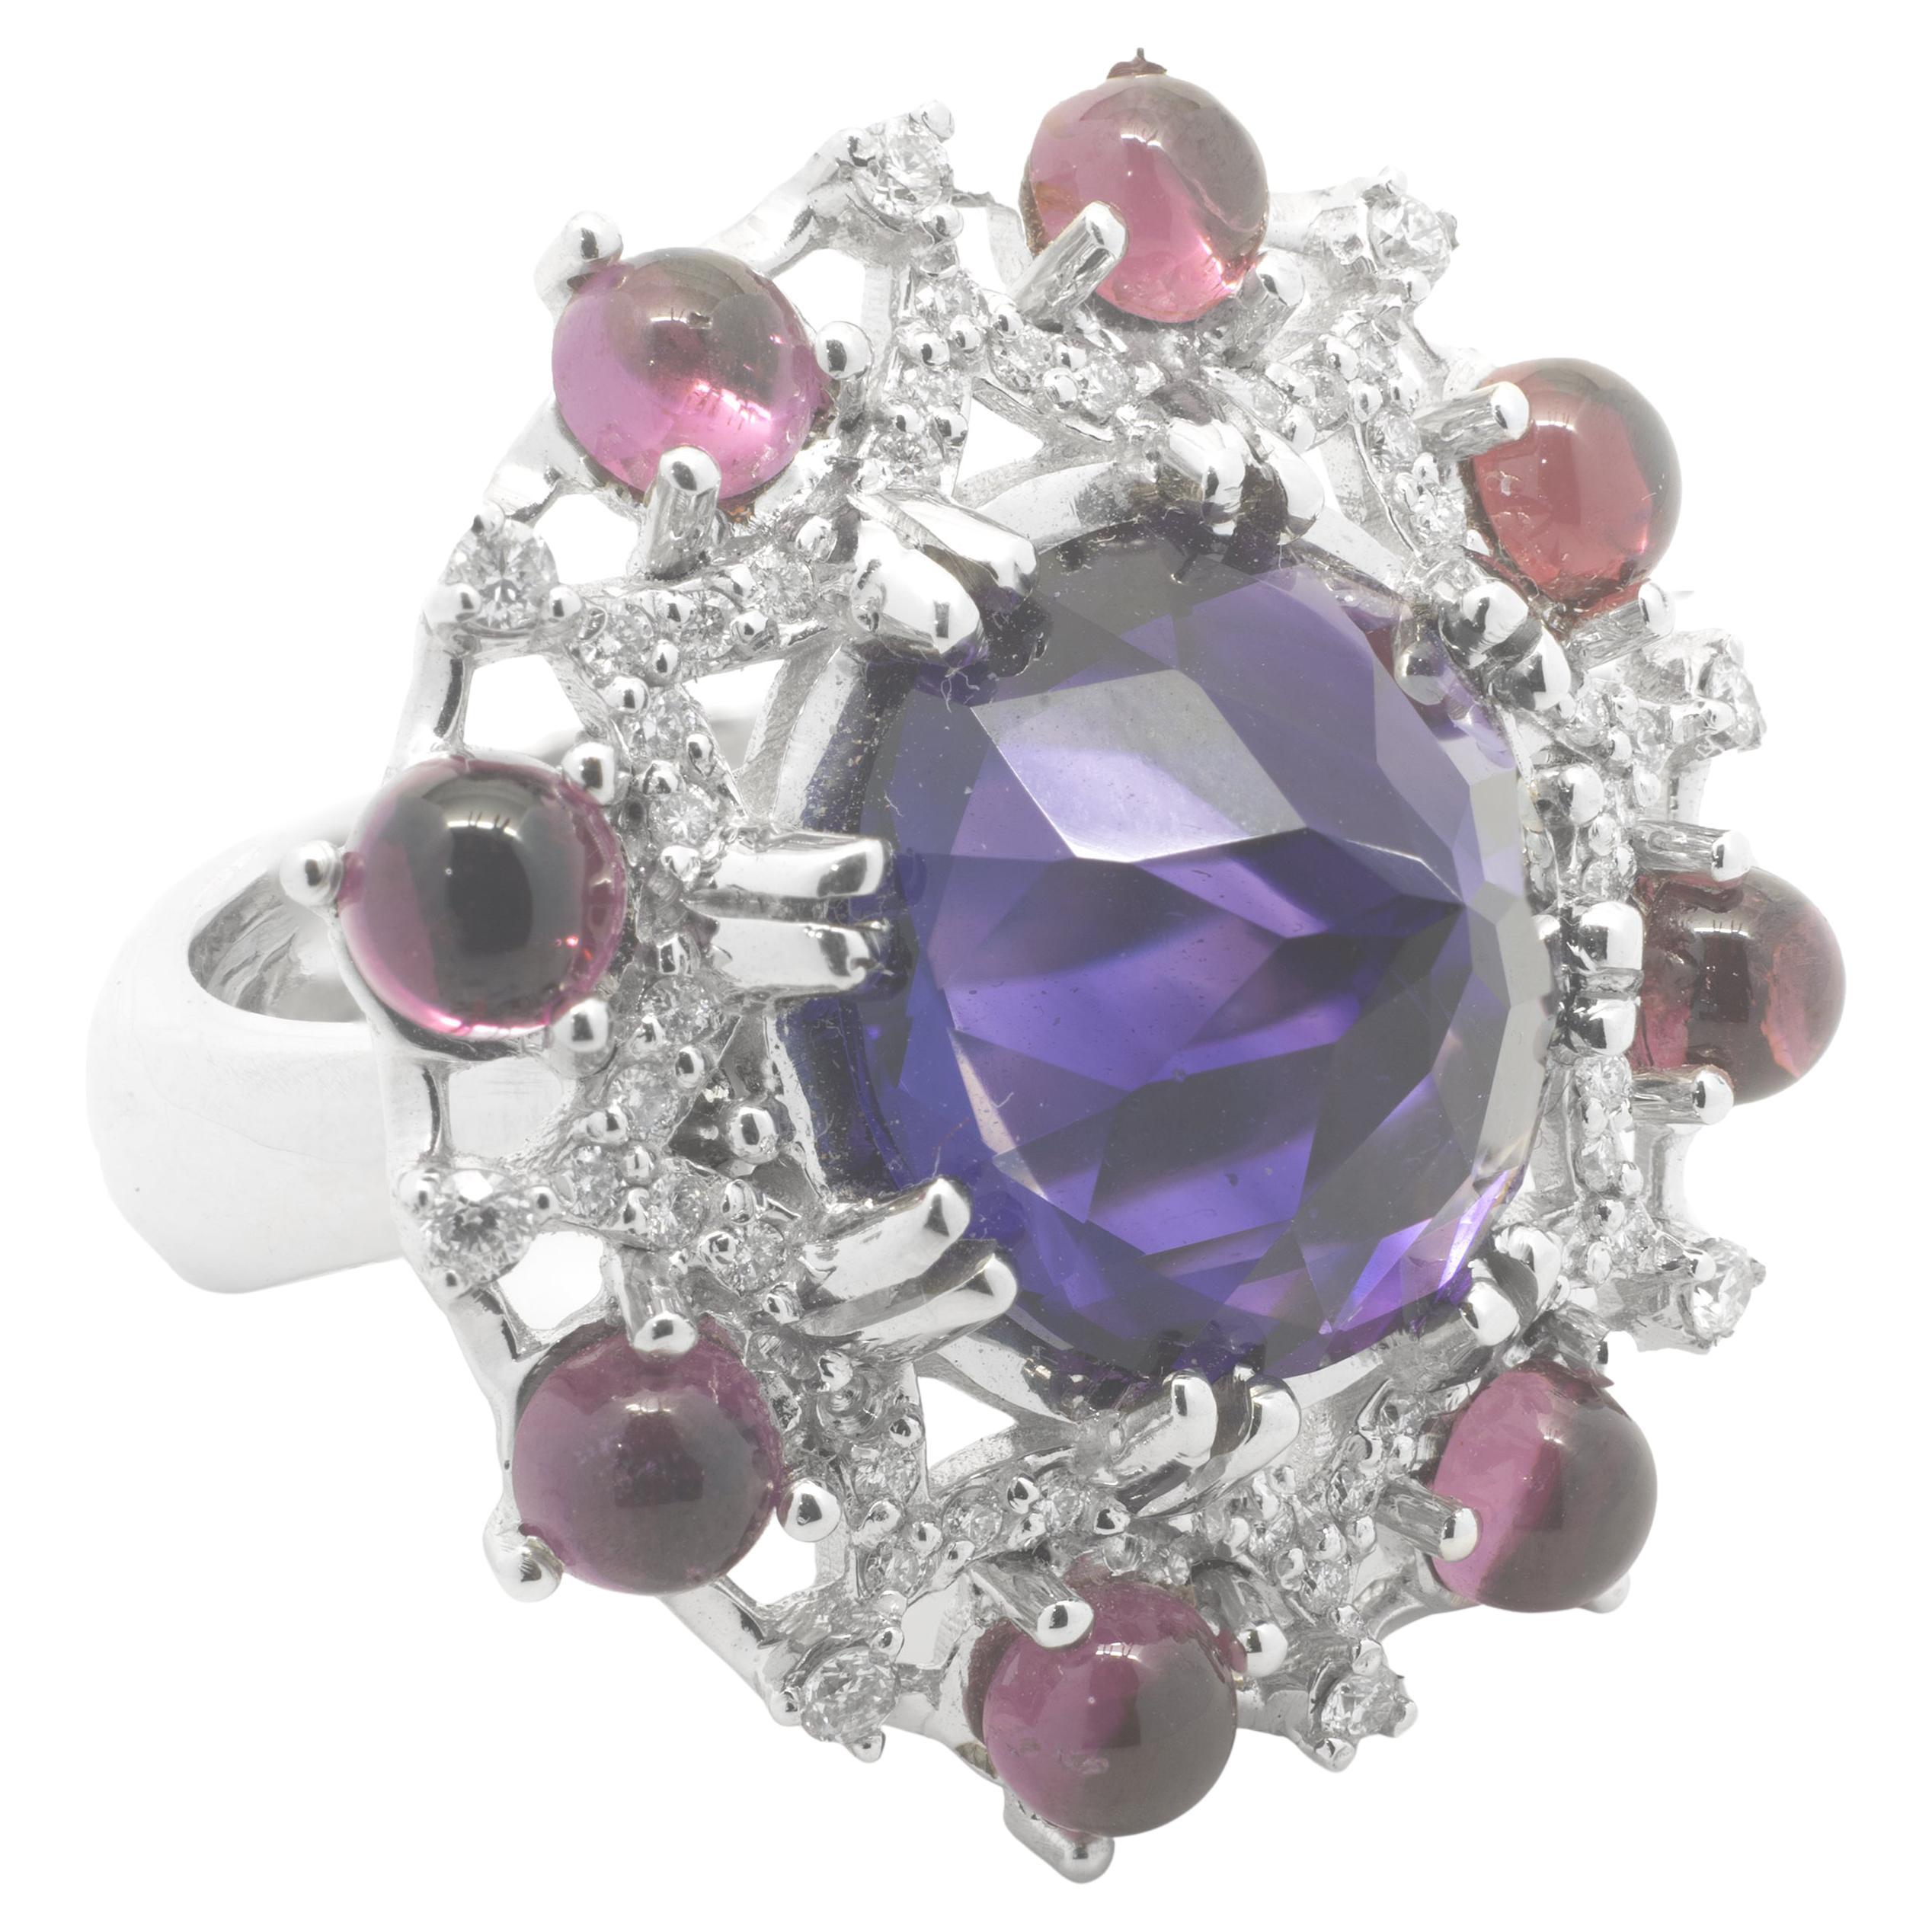 Material: 14K white gold
Diamond: 48 round brilliant cut = .48cttw
Color: G
Clarity: VS2
Amethyst: 1 fancy faceted cut = 8.00cttw
Color: ARIZONA
Clarity: AAA
Ring Size: 7.5 (please allow up to 2 additional business days for sizing